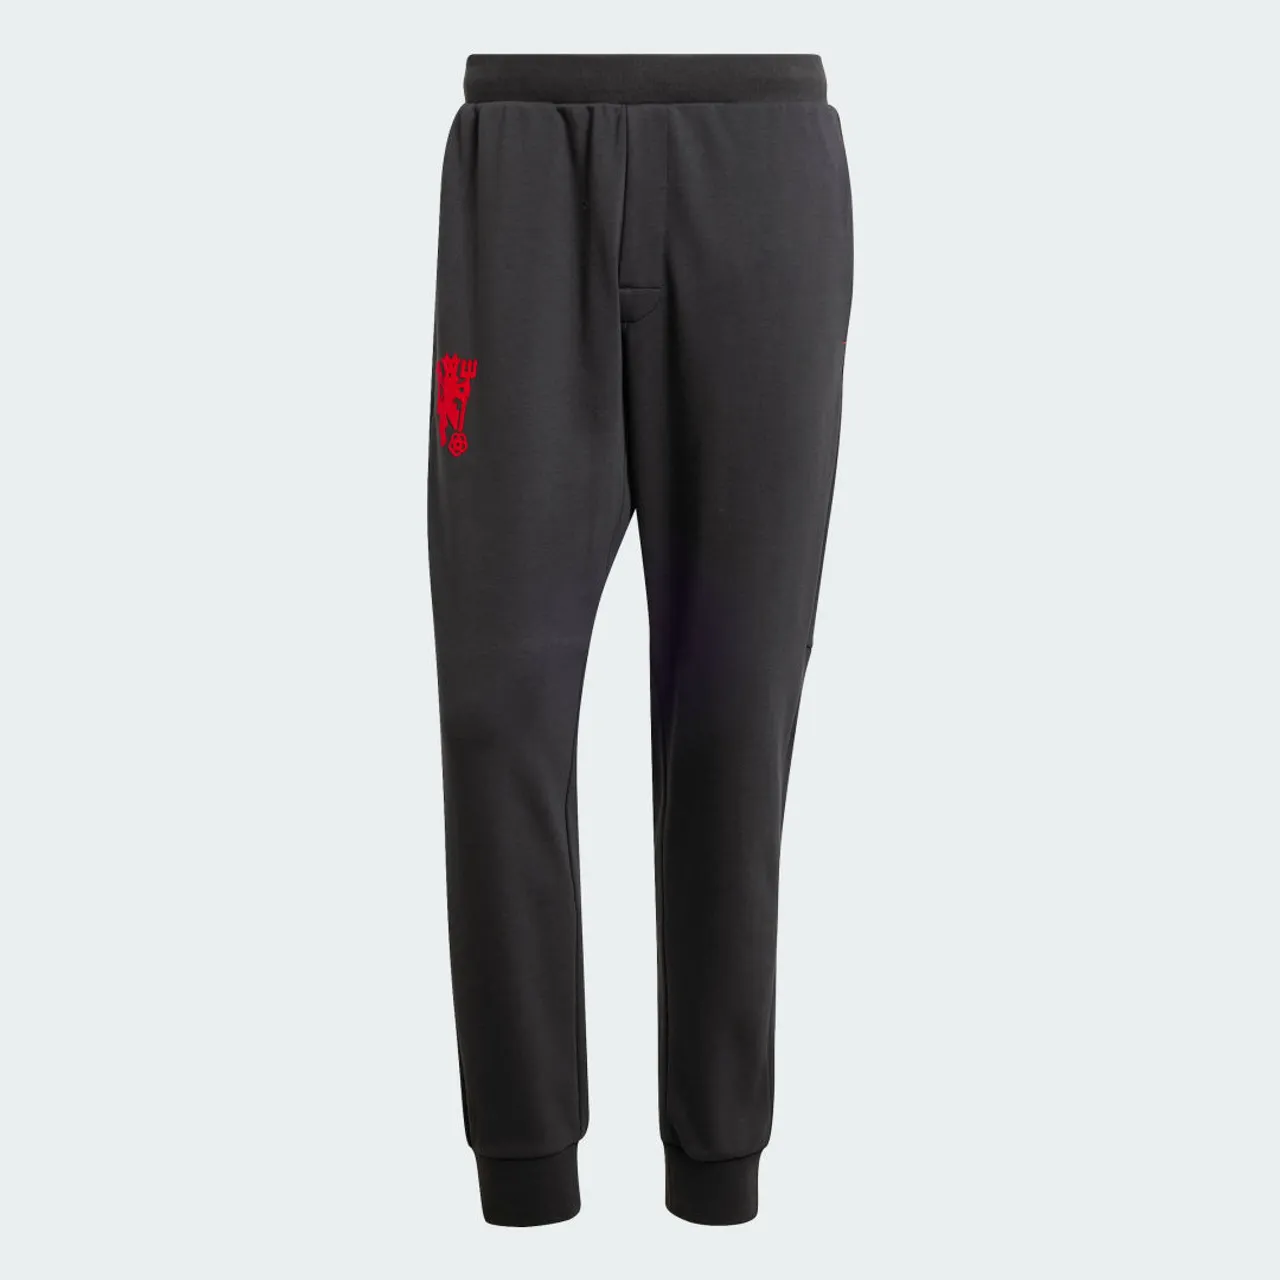 Manchester United Cultural Story Tracksuit Bottoms